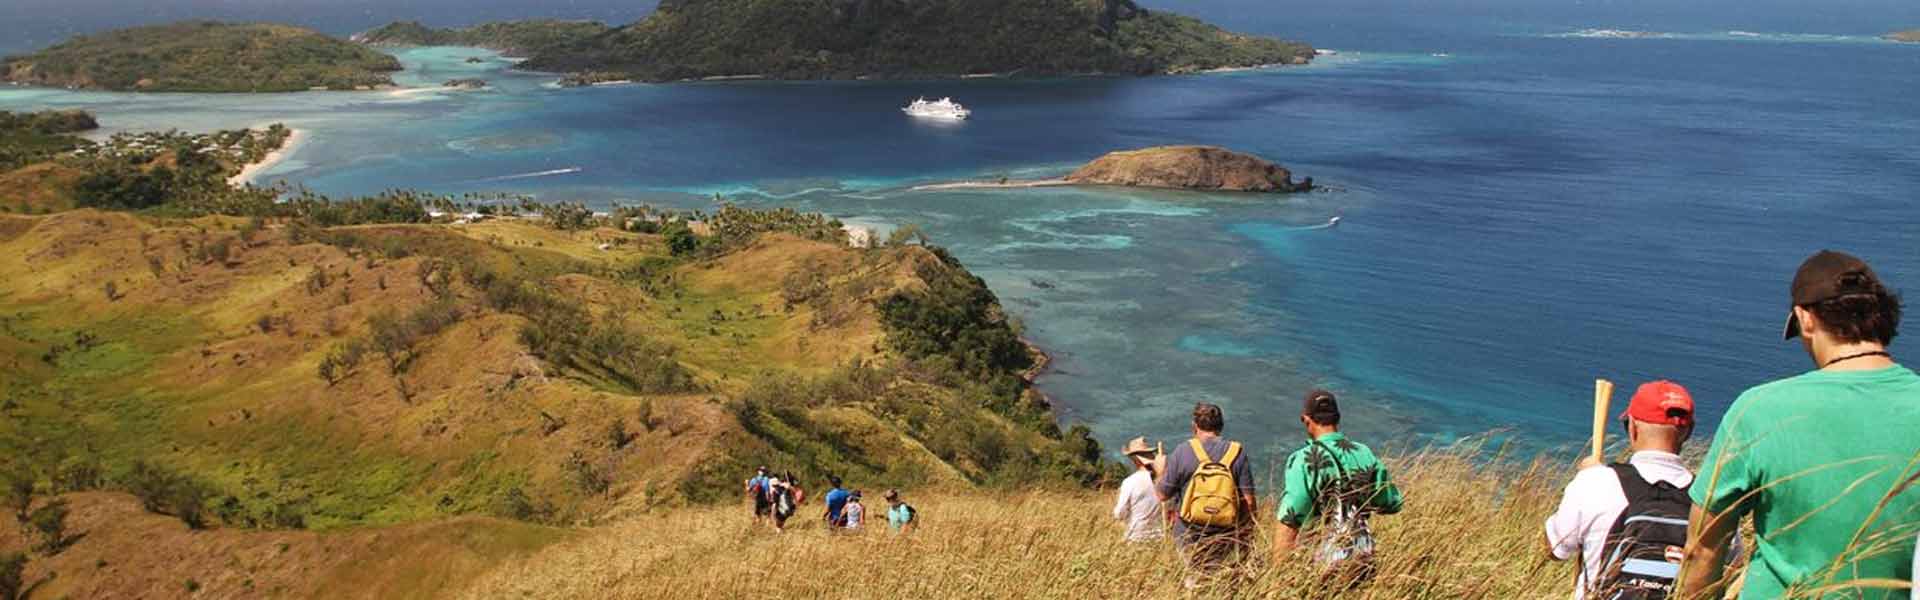 9 Nights Package for Two (7 Nights Lau & Kadavu Discovery Cruise) with Flights, Transfers and More!